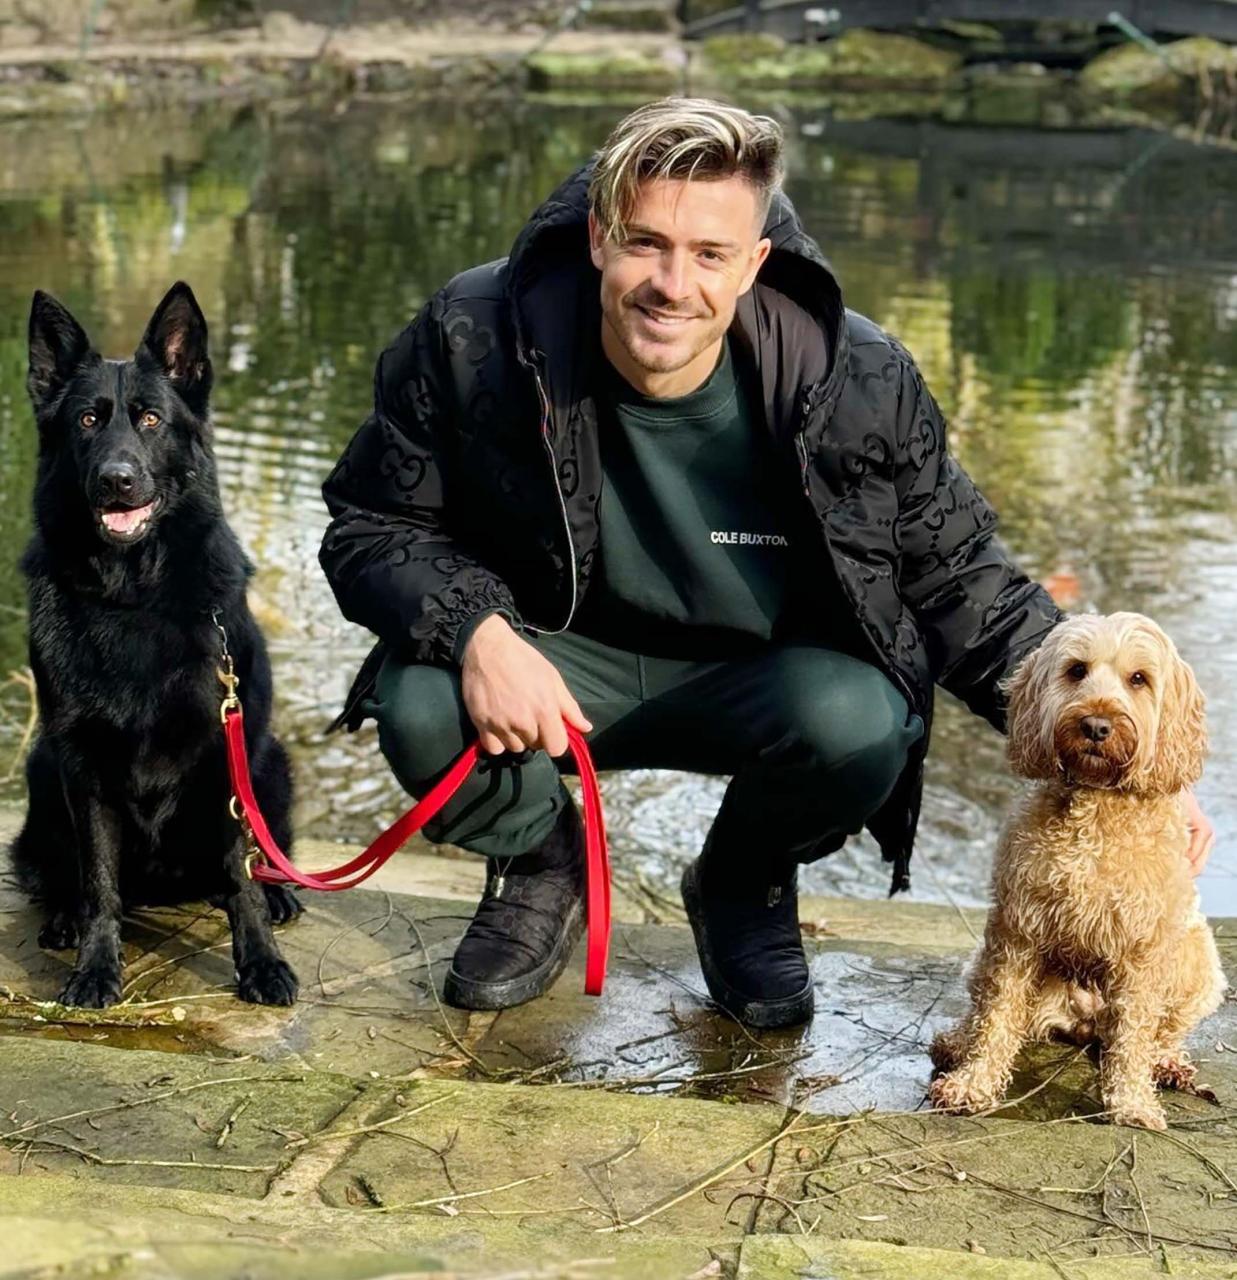 Jack Grealish poses with his £25,000 Belgian Malinois protection dog in a 'show of strength' after his burglary ordeal.